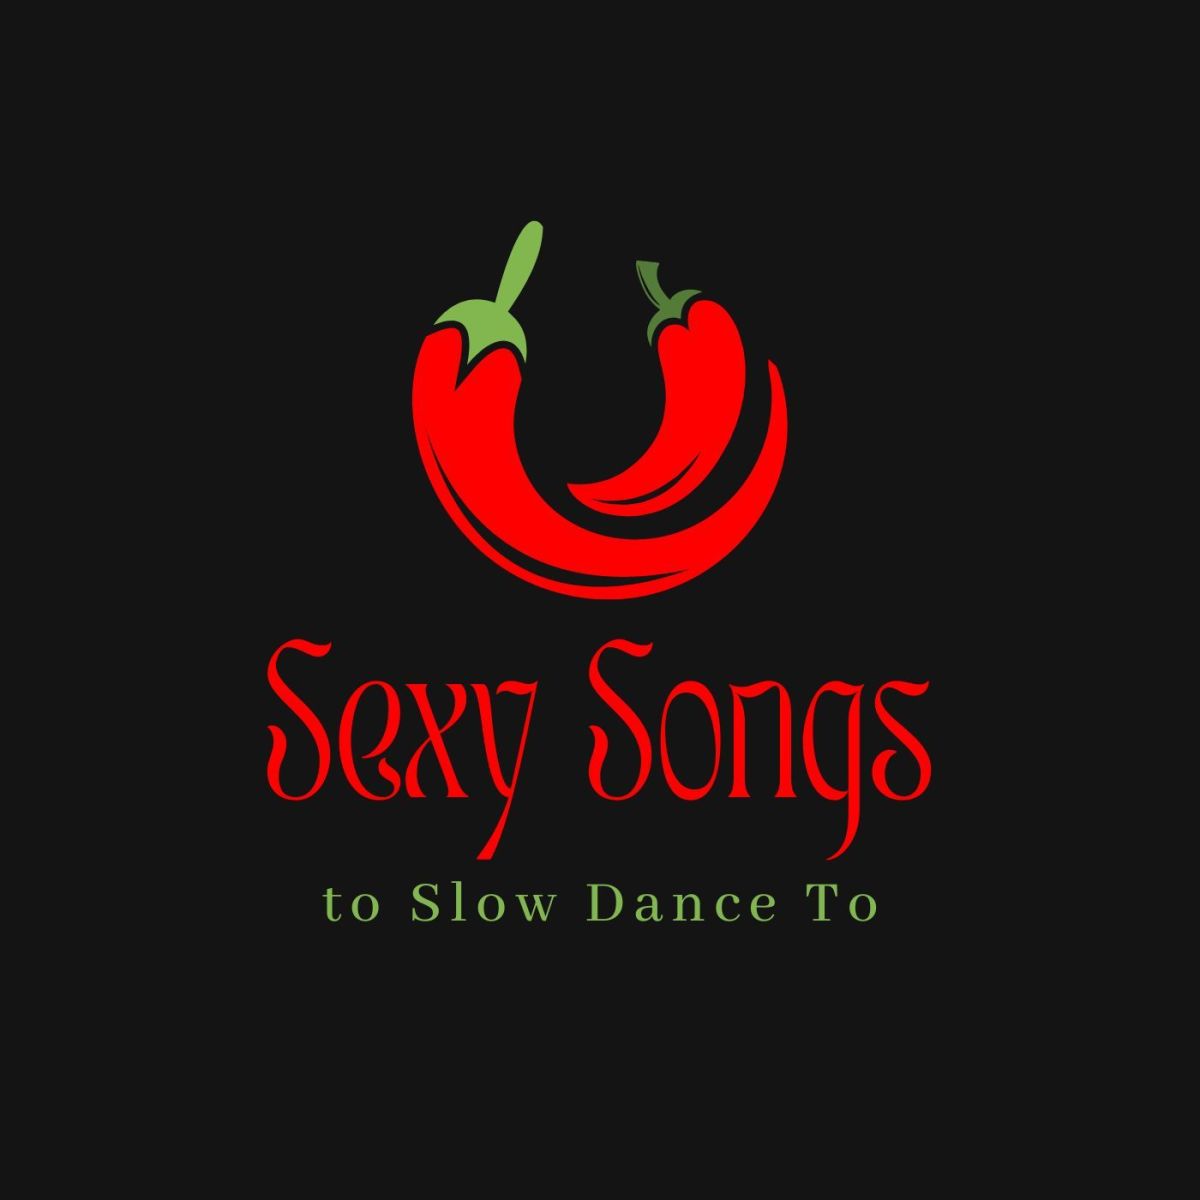 Sexy Songs to Slow Dance To